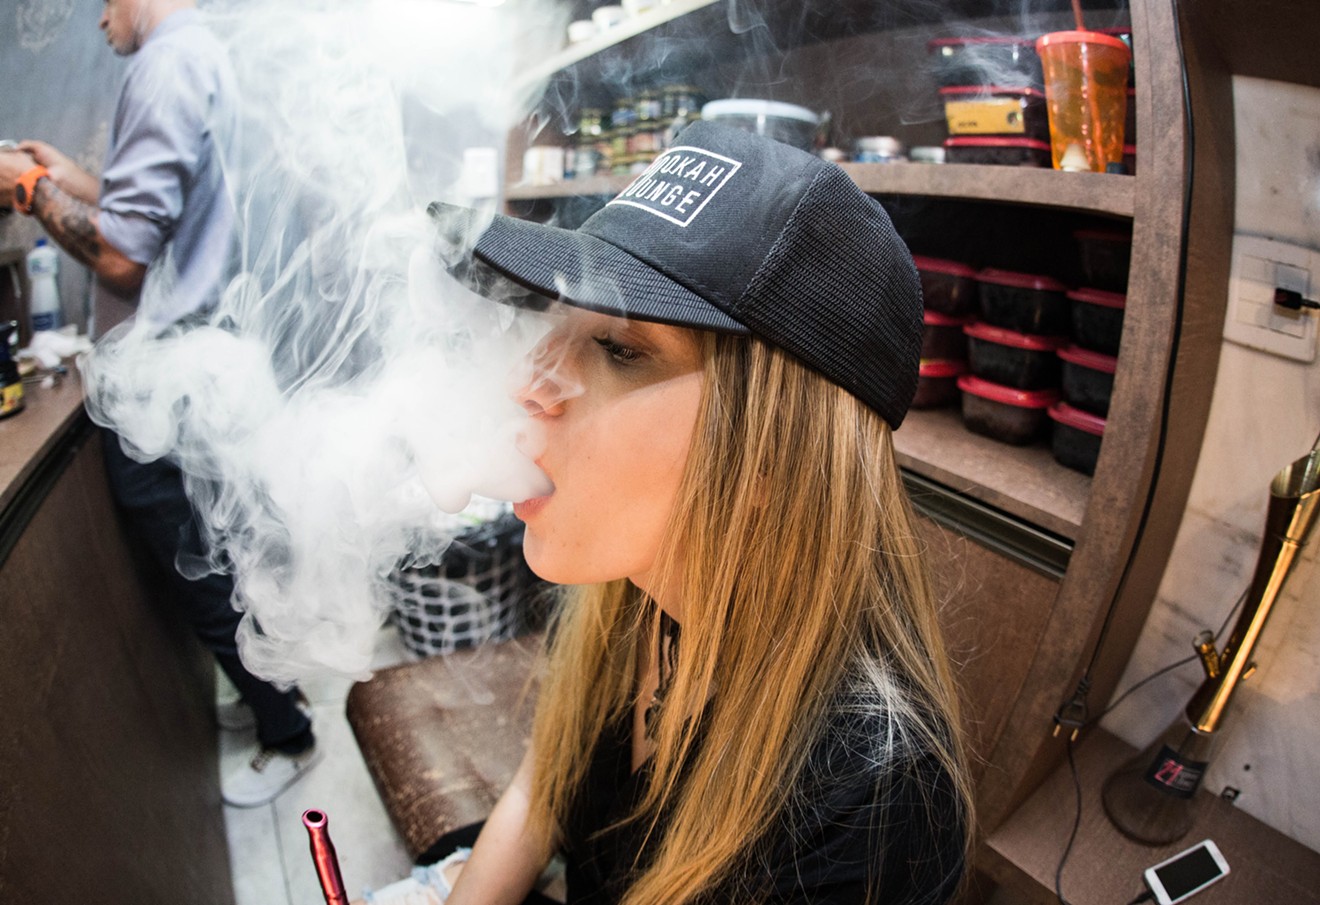 Vape shop owners and others convinced lawmakers against introducing a flavored-vaping ban.